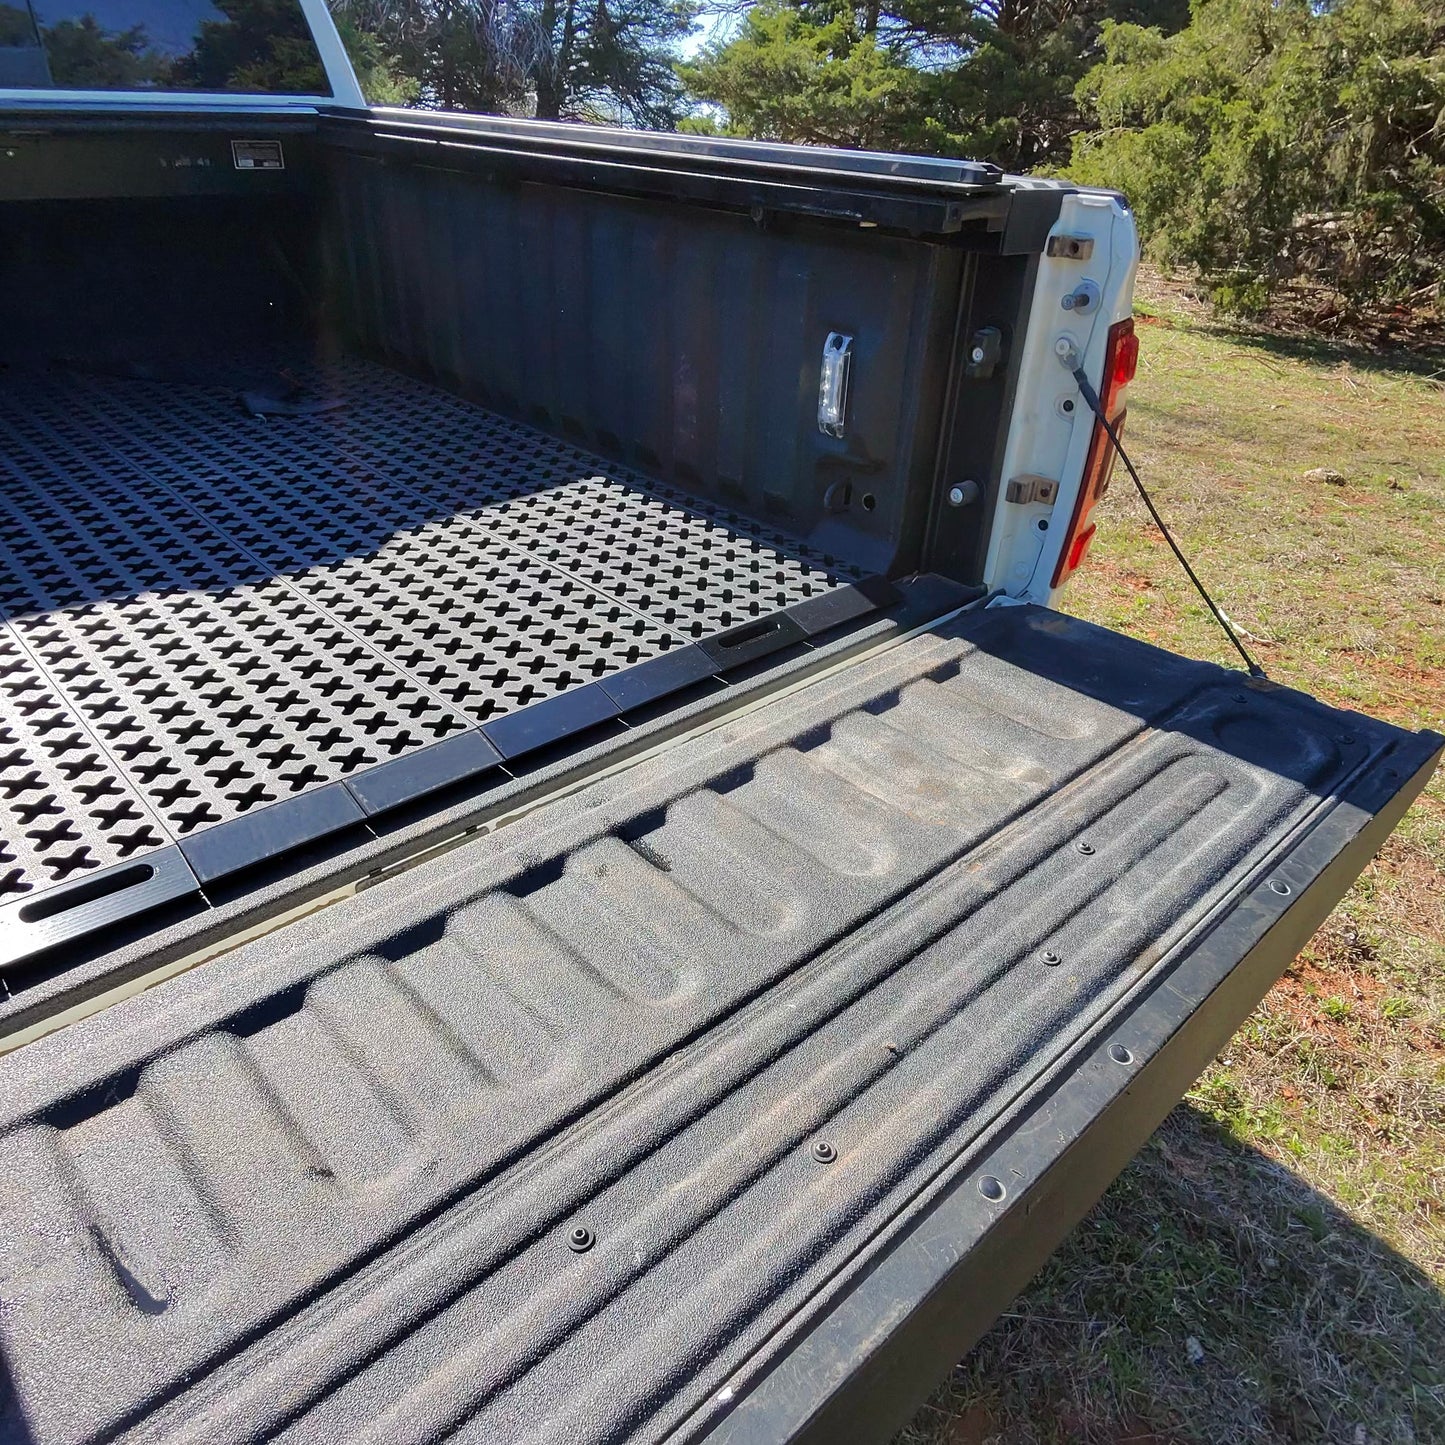 Tmat ramp set installed into a Tmat in the back of a pickup.